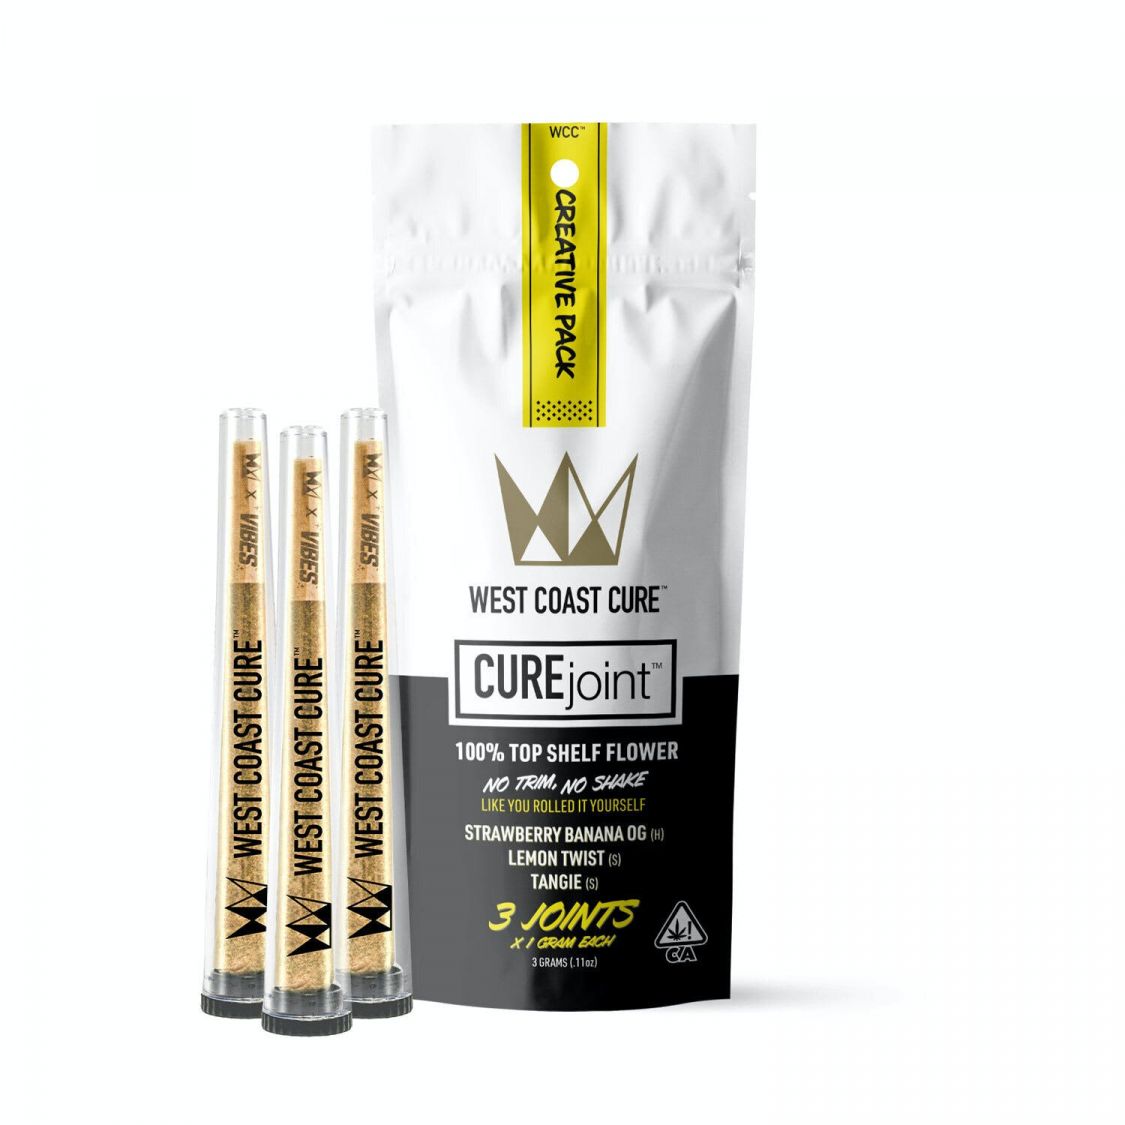 West Coast Cure Creative Pack - CUREjoint Variety Pack 3 x 1G Pre-rolls Preroll